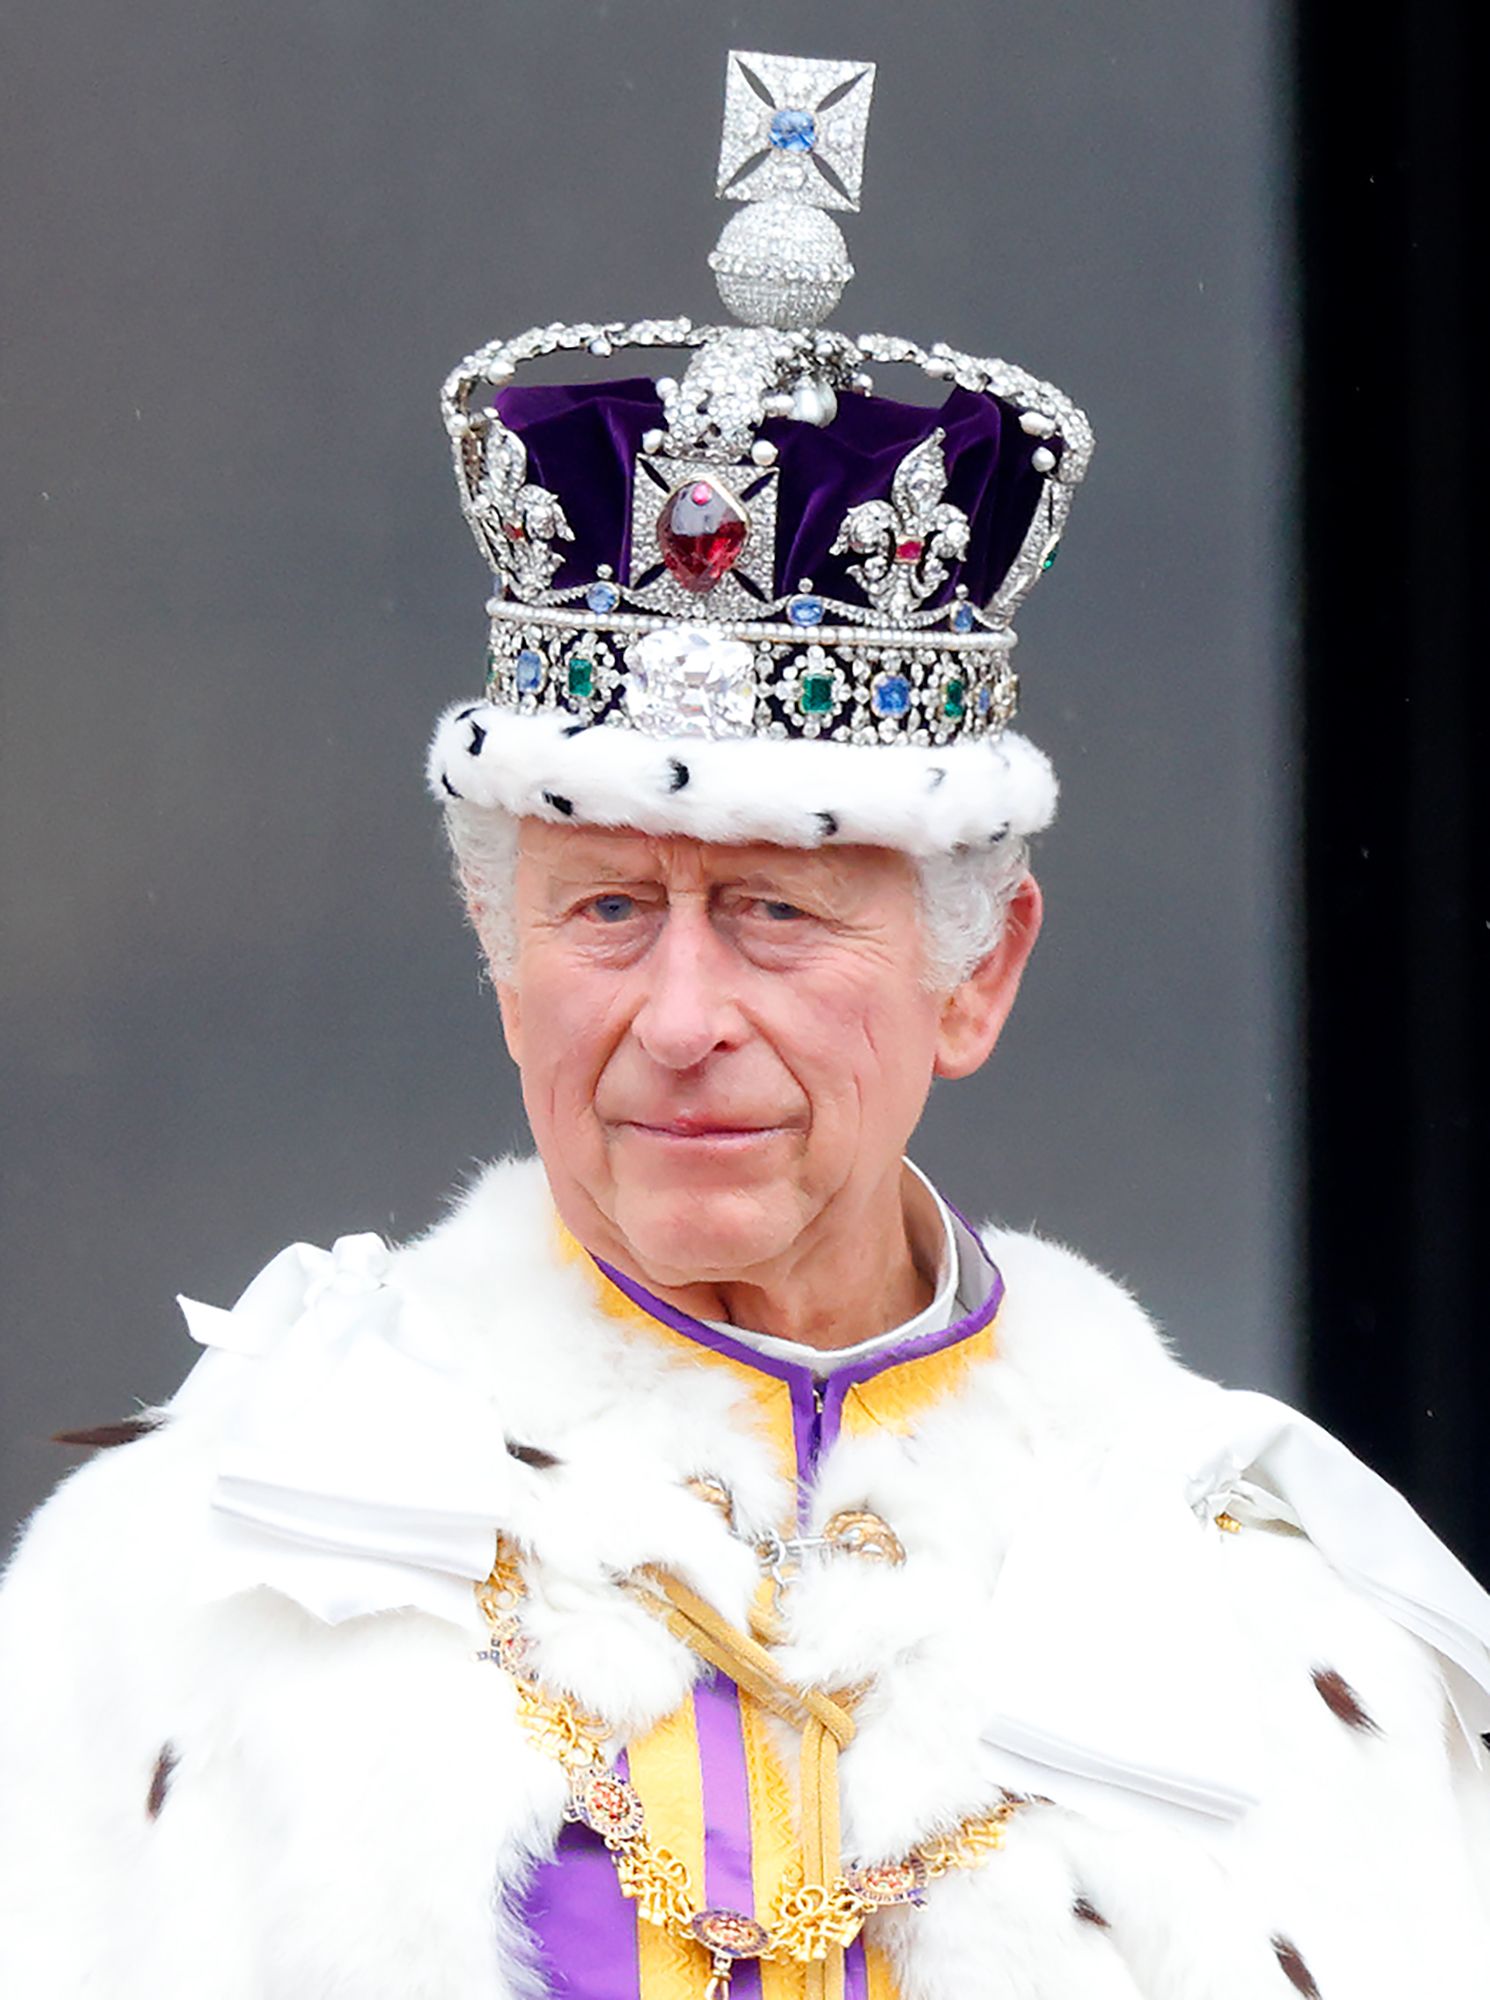 Updates: King Charles III crowned in lavish ceremony, News